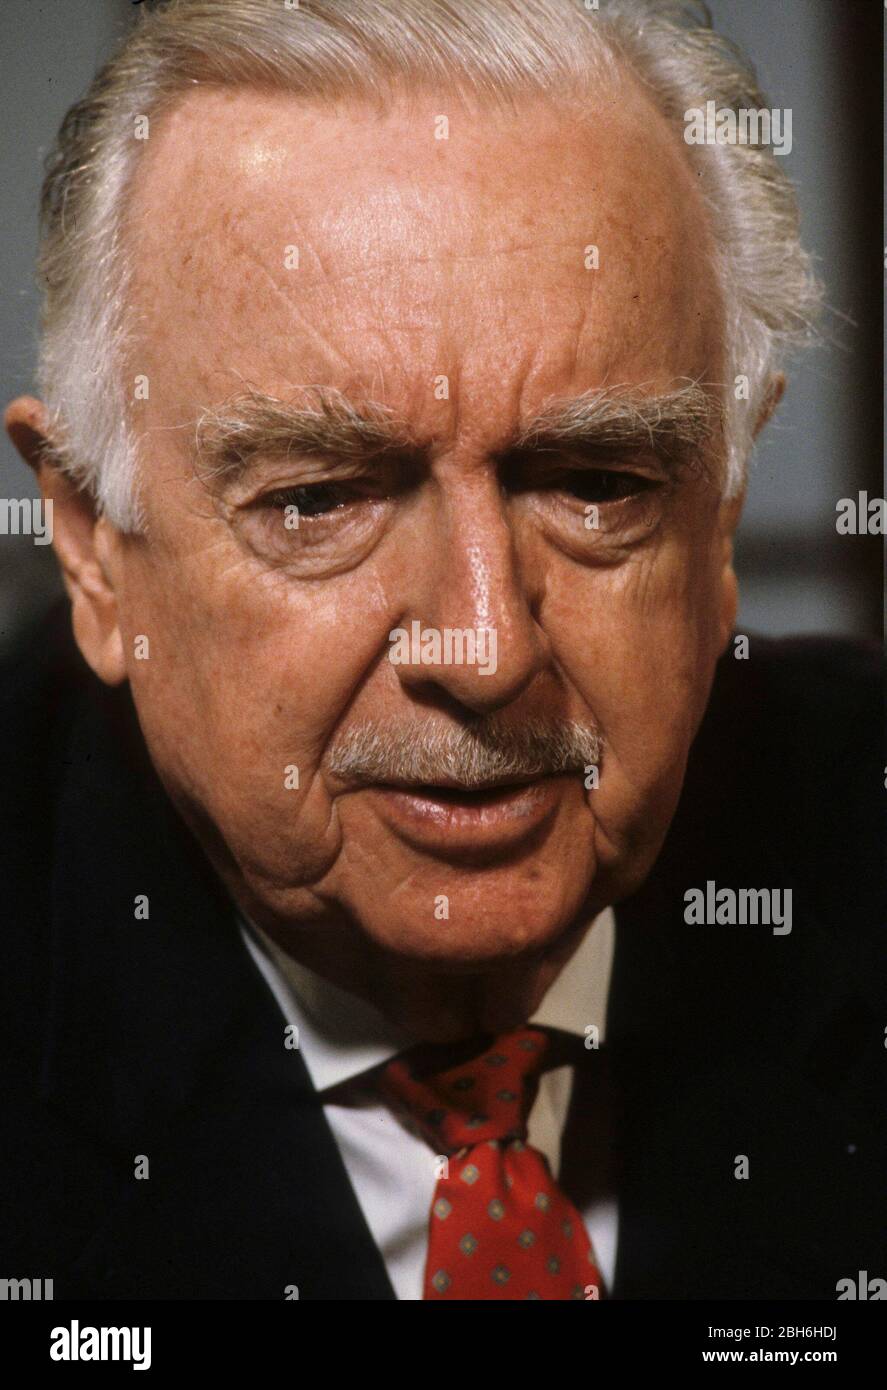 Austin, Texas USA, May 1999: CBS newsman Walter Cronkite speaks at an event entitled 'The Legacy of Space' at the Lyndon Baines Johnson (LBJ) Library in Austin.   ©Bob Daemmrich Stock Photo